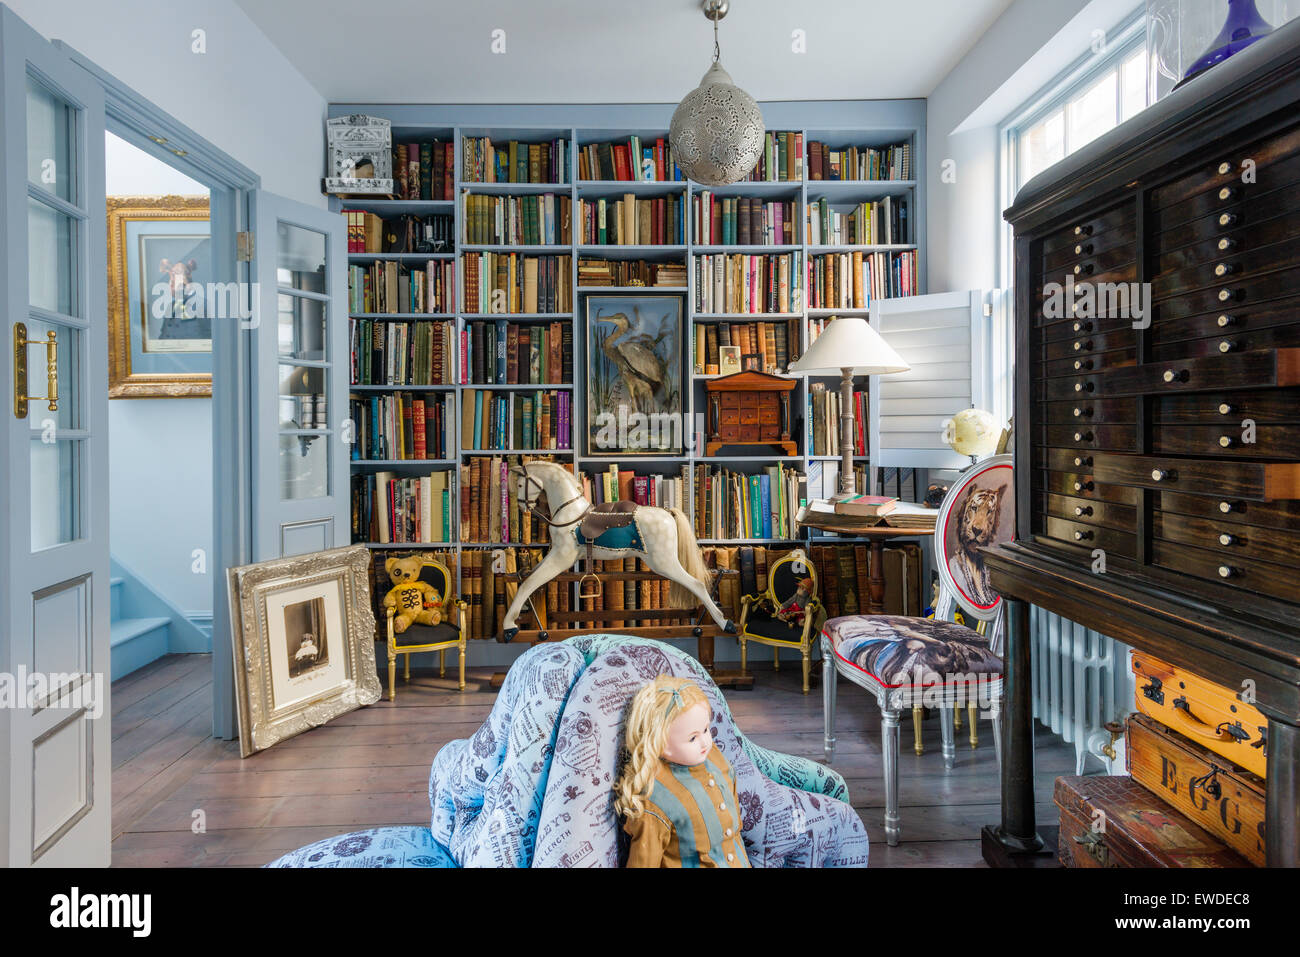 Blue painted shelves in library with antique rocking horse and Cory Visitorian upholstered chair Stock Photo